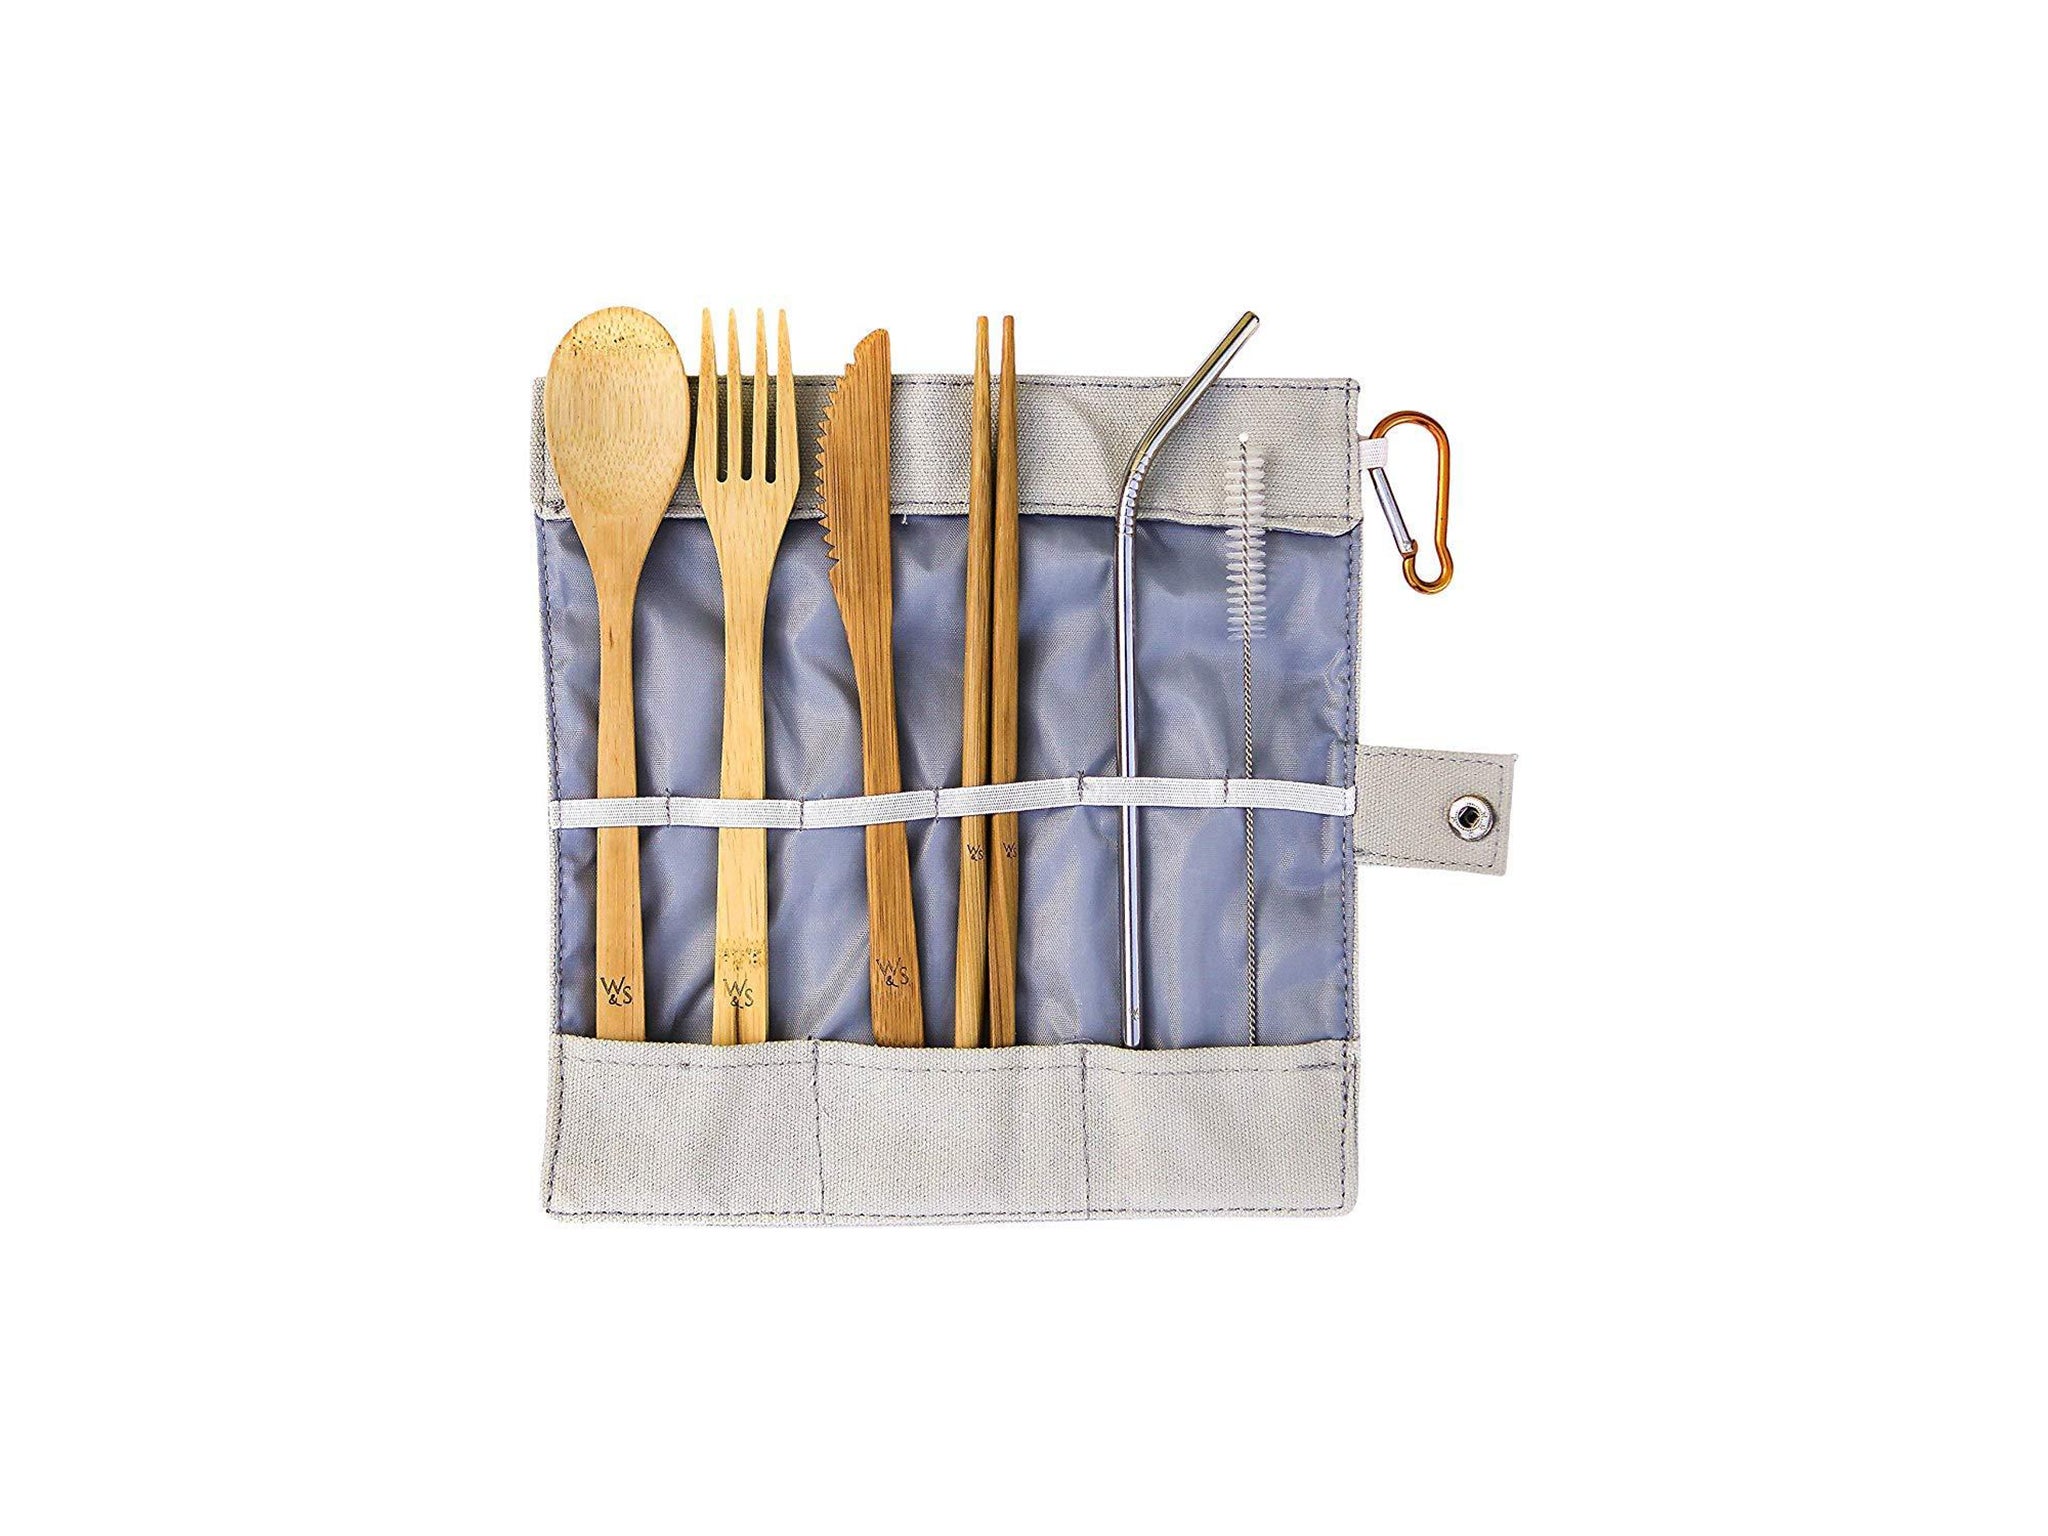 Make your eating habits more eco-friendly too with a portable cutlery set